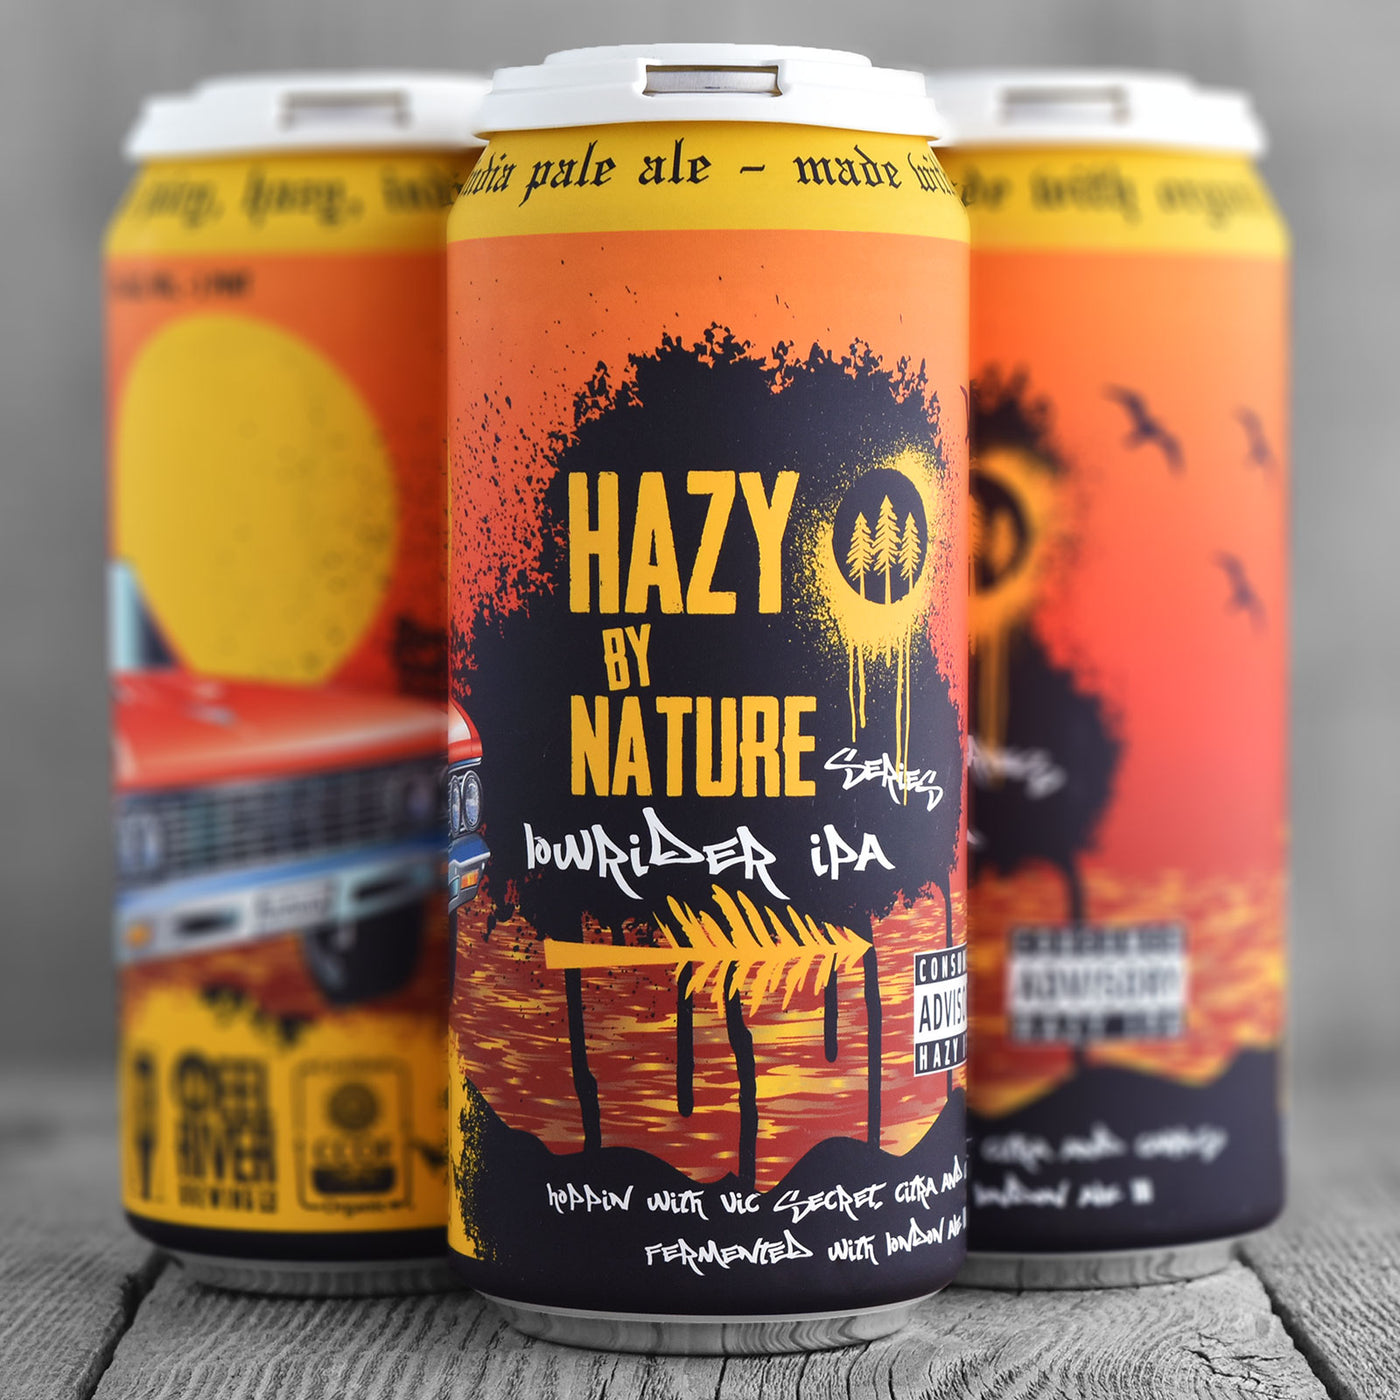 Eel River Hazy By Nature - Lowrider IPA